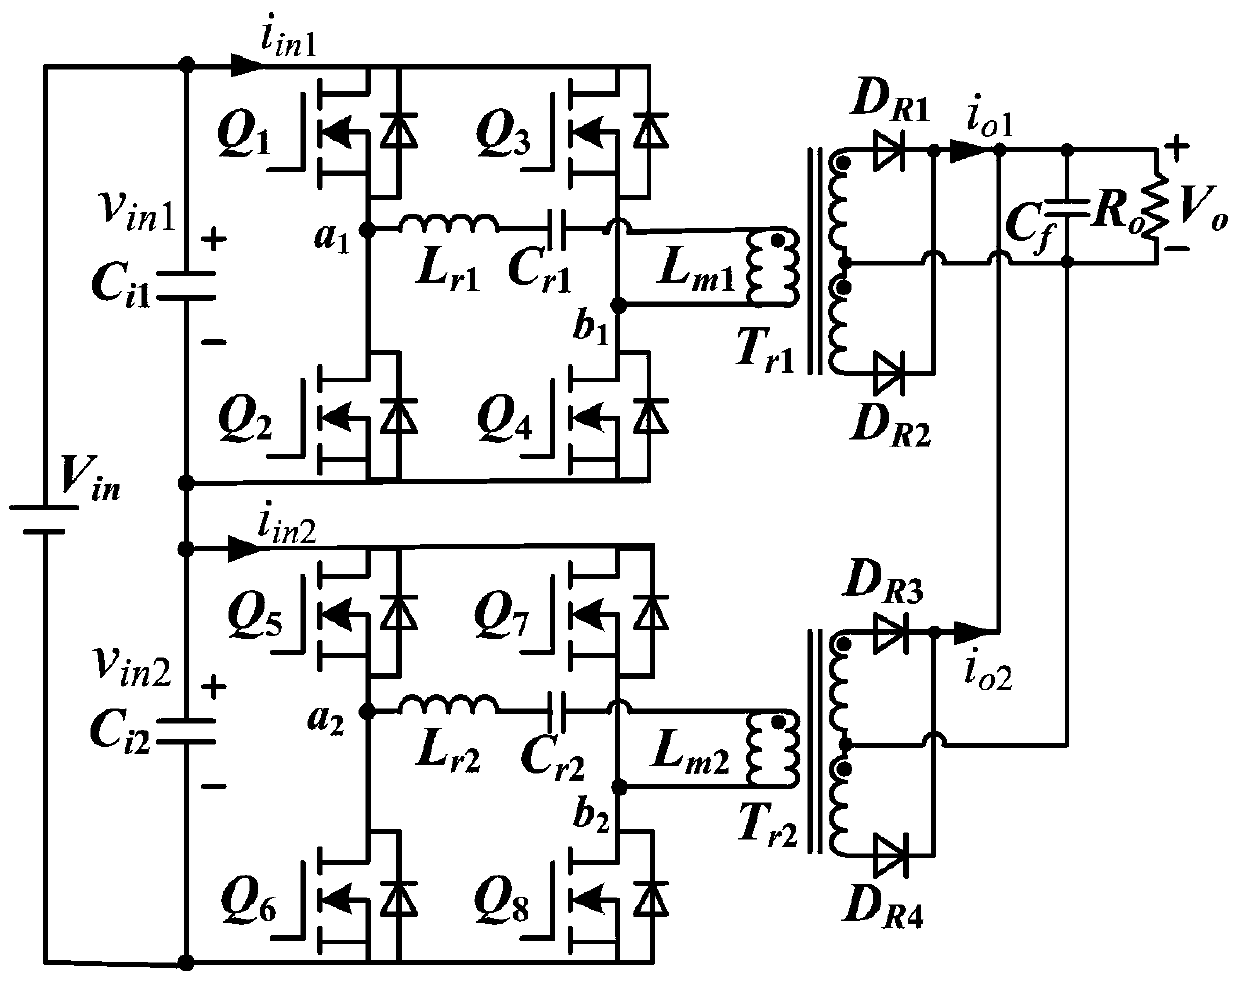 A Switching Frequency Regulation Method Based on Current Cross Feedback